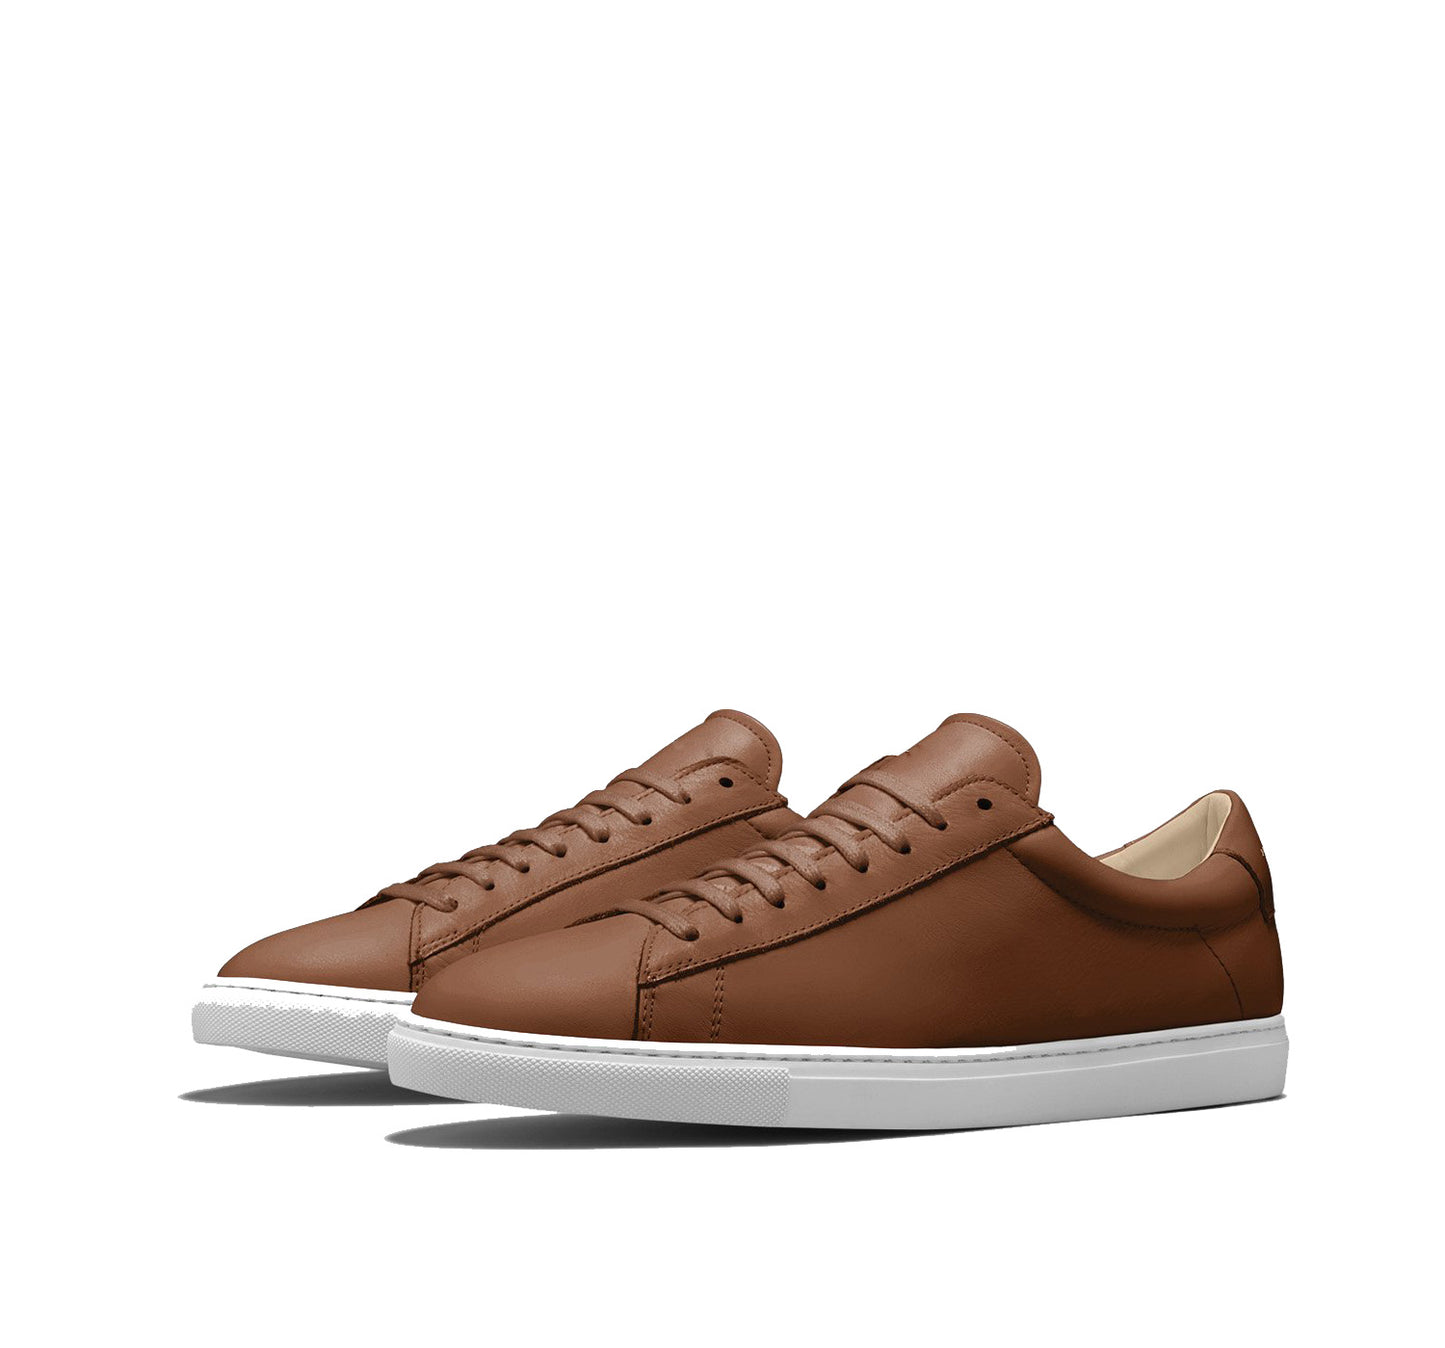 Brown Tan Leather Low Top Lace Up Sneaker for Men. White Comfortable Cup Sole.